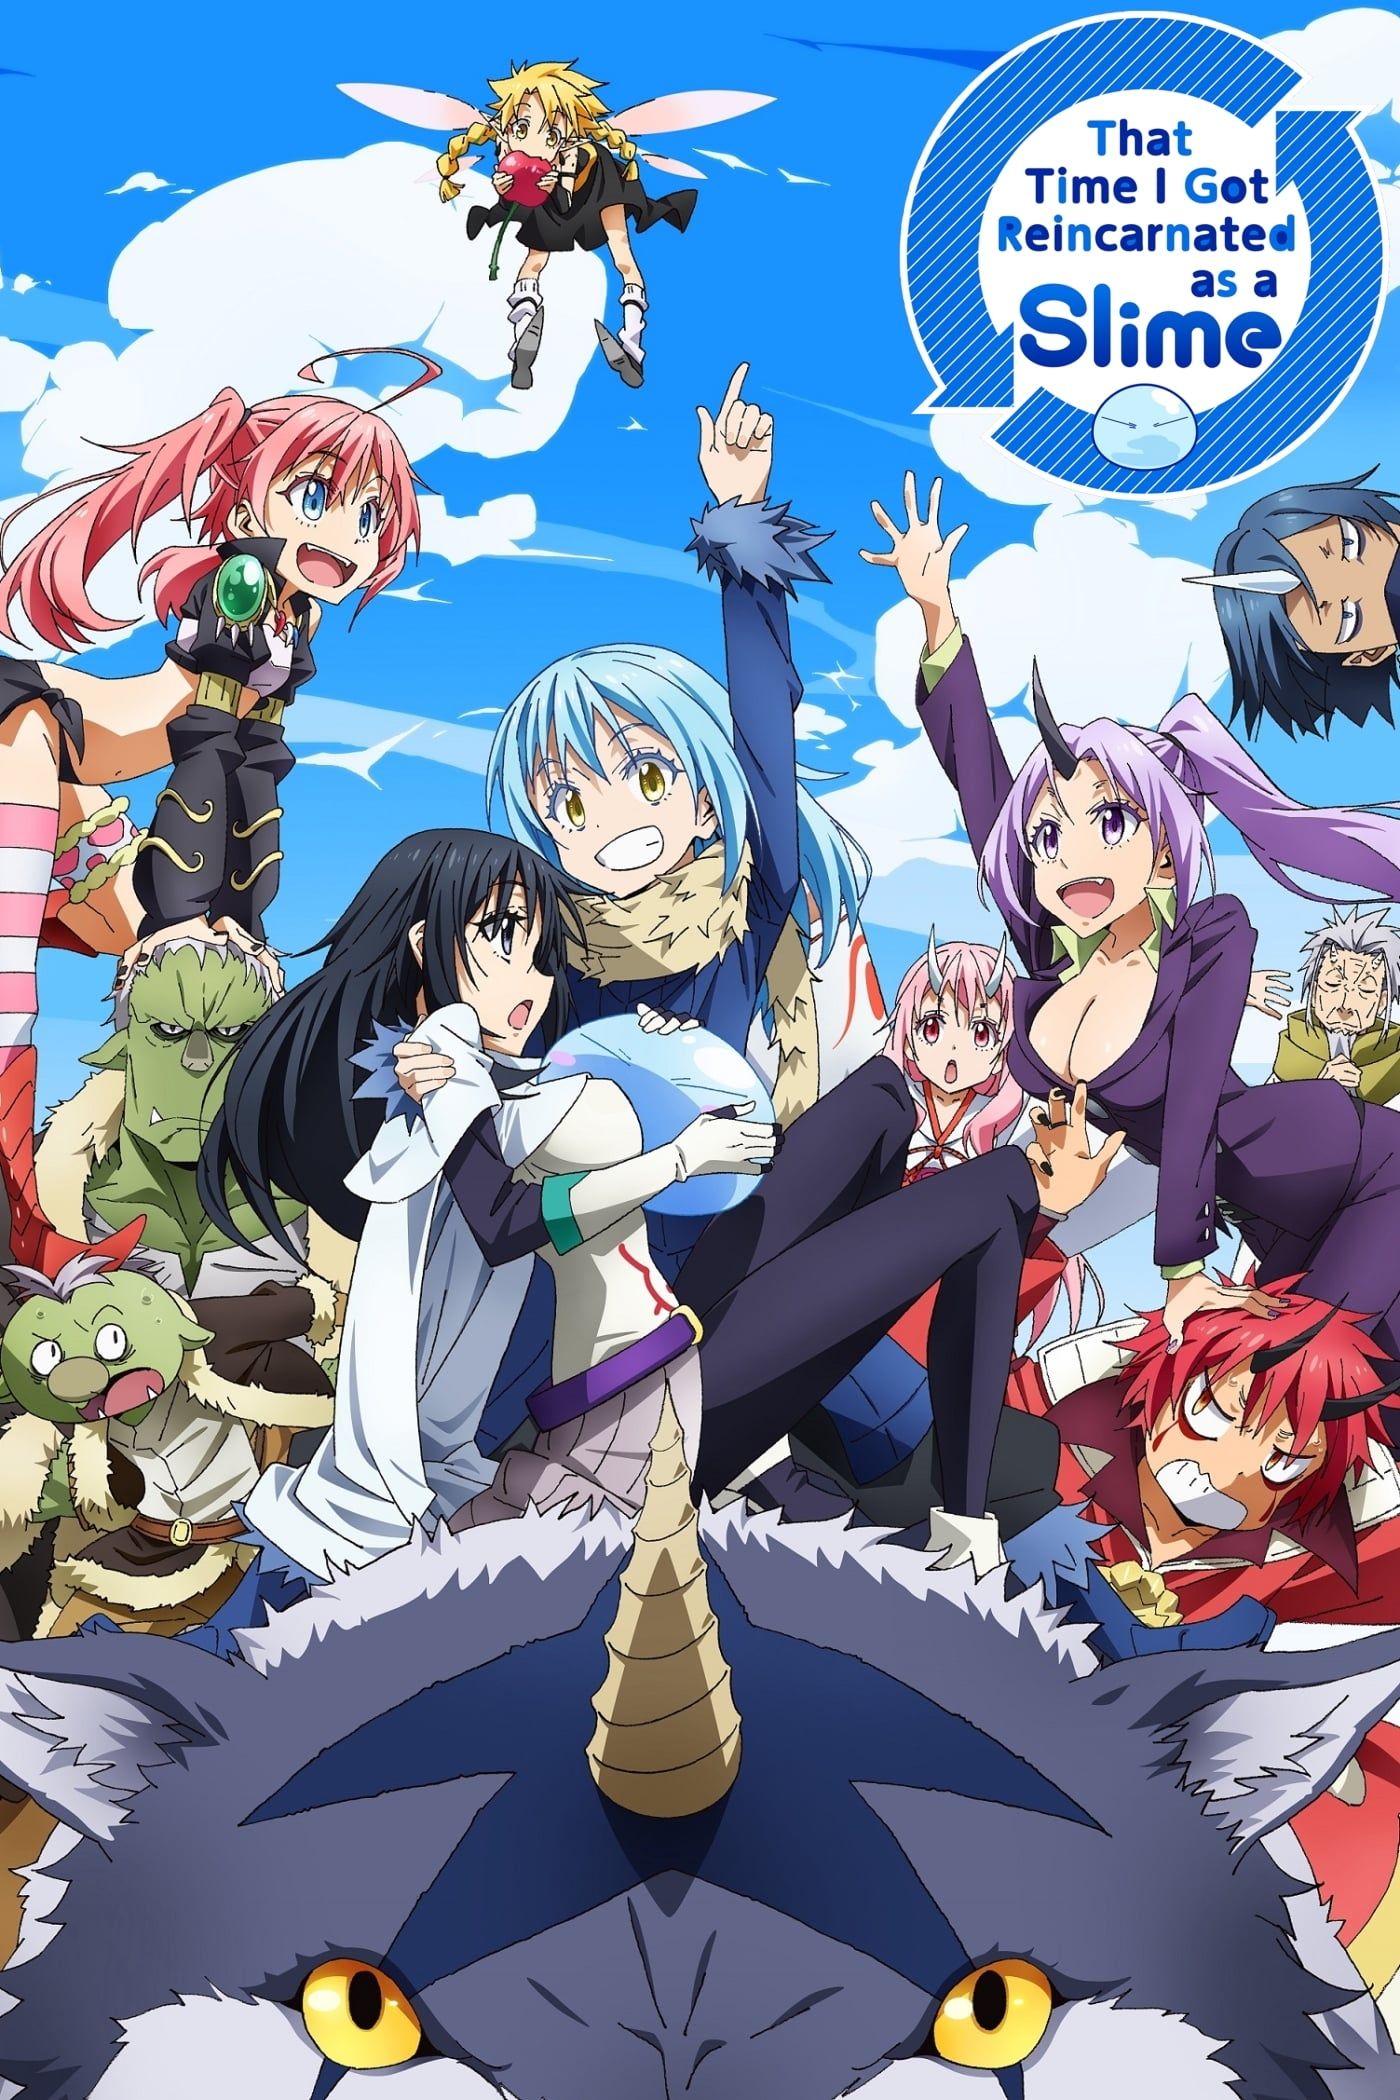 TV Time - Brynhildr in the Darkness (TVShow Time)